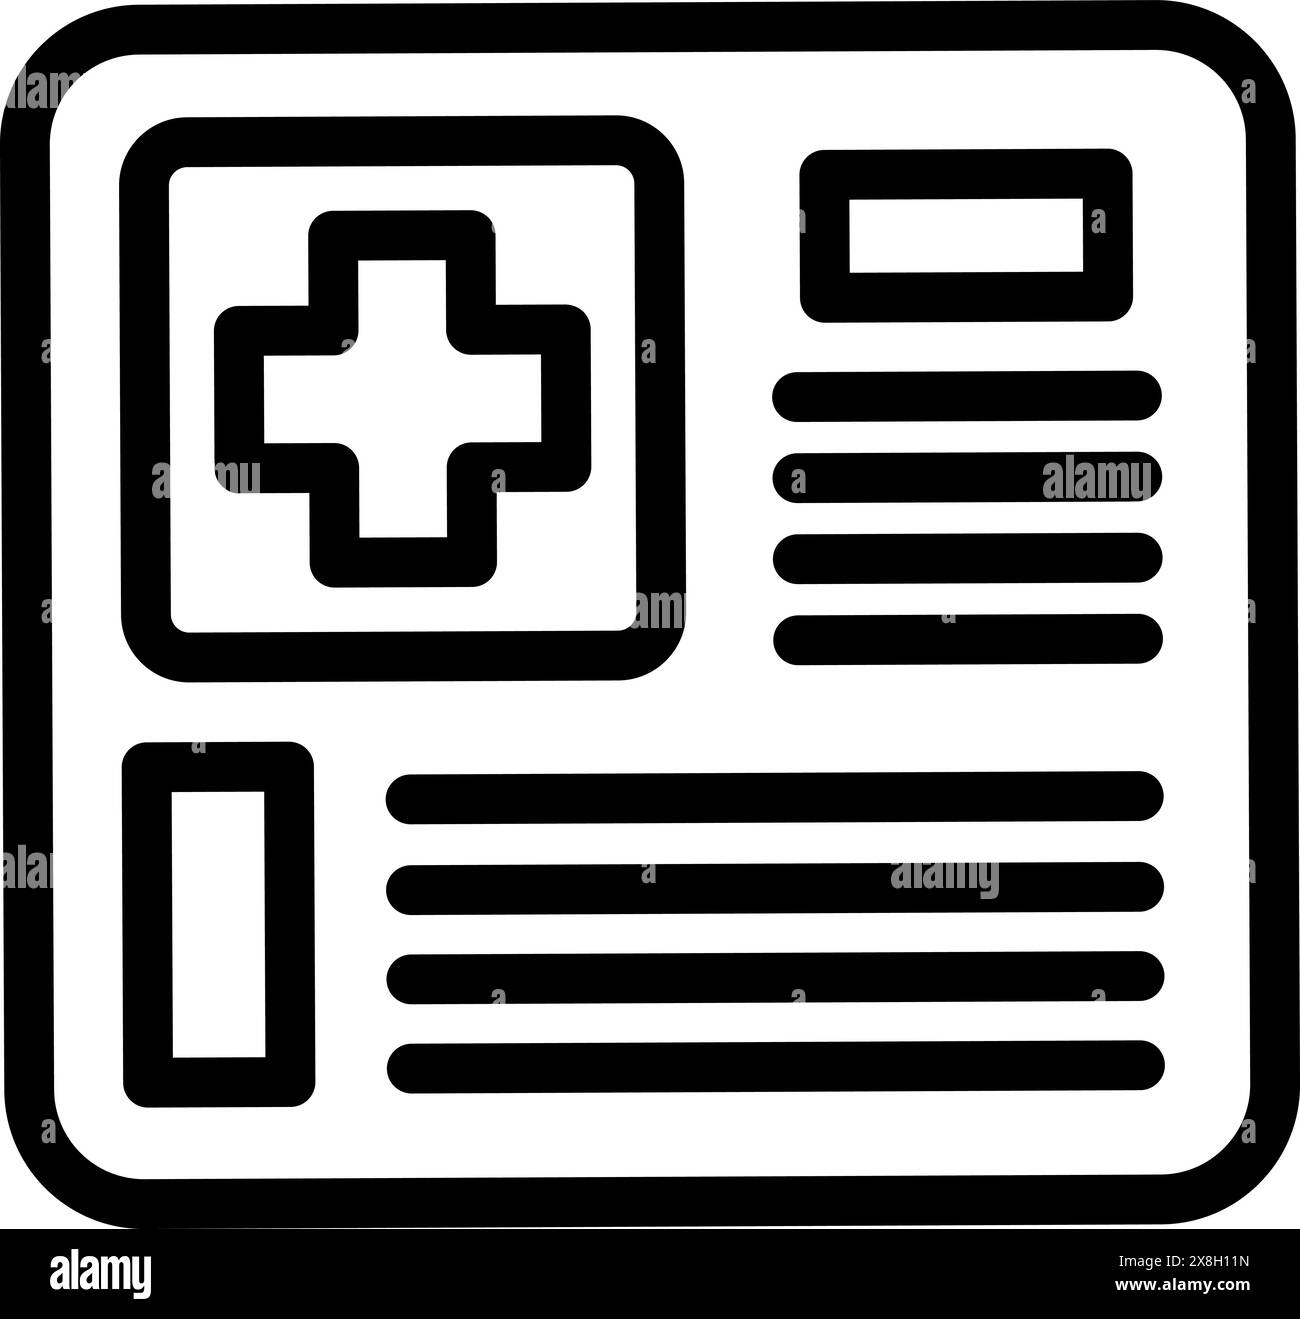 Black and white medical report icon illustration for healthcare symbol, document, and record graphic in clinic paperwork, patient history, and electronic health record ehr vector representation Stock Vector